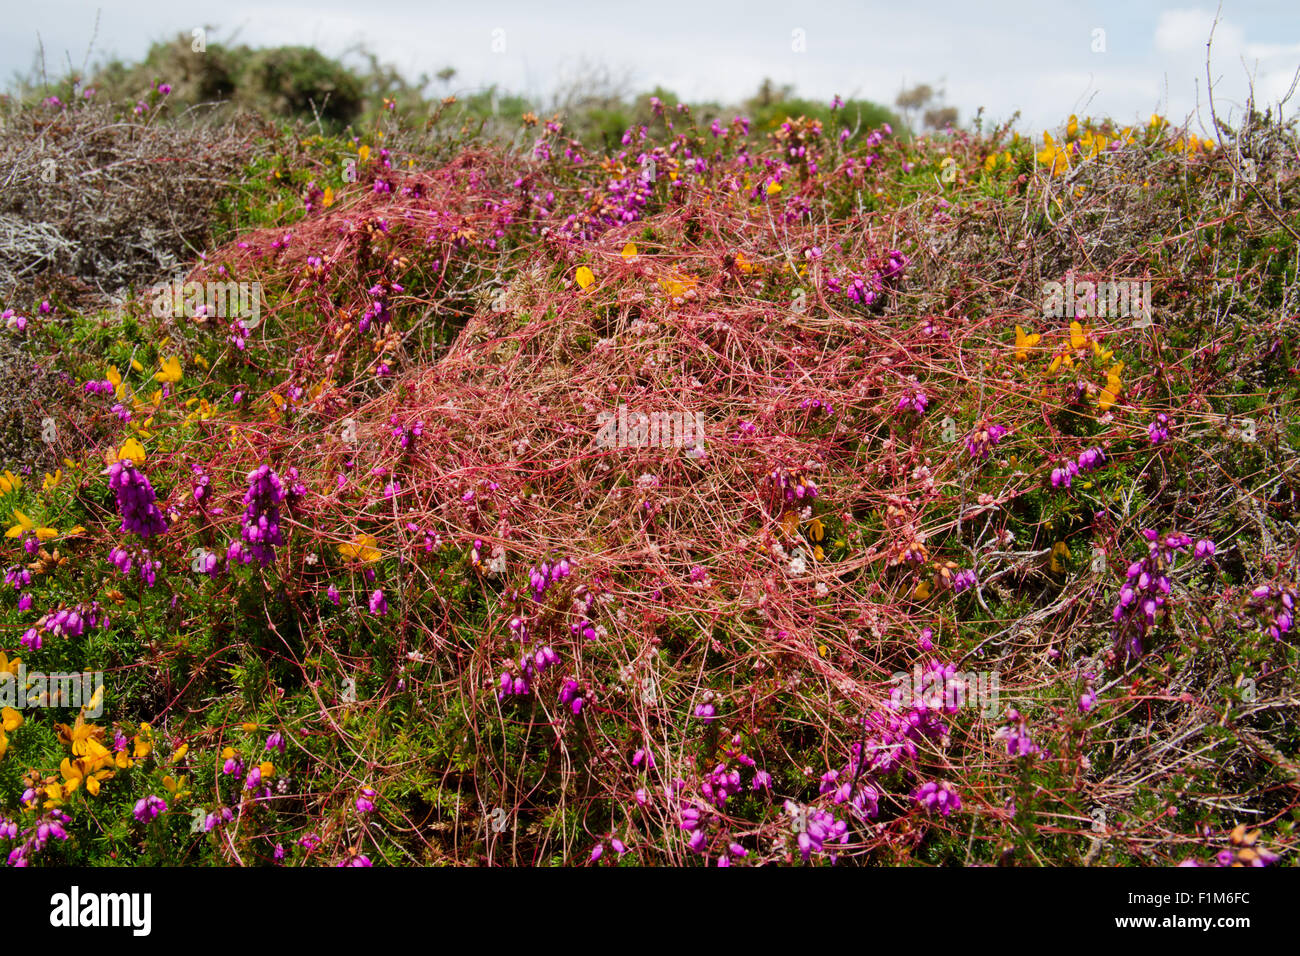 Red yarns of Dodder (Cuscuta epithymum, also known as Hellweed, Strangle-tare) growing on Heather Stock Photo